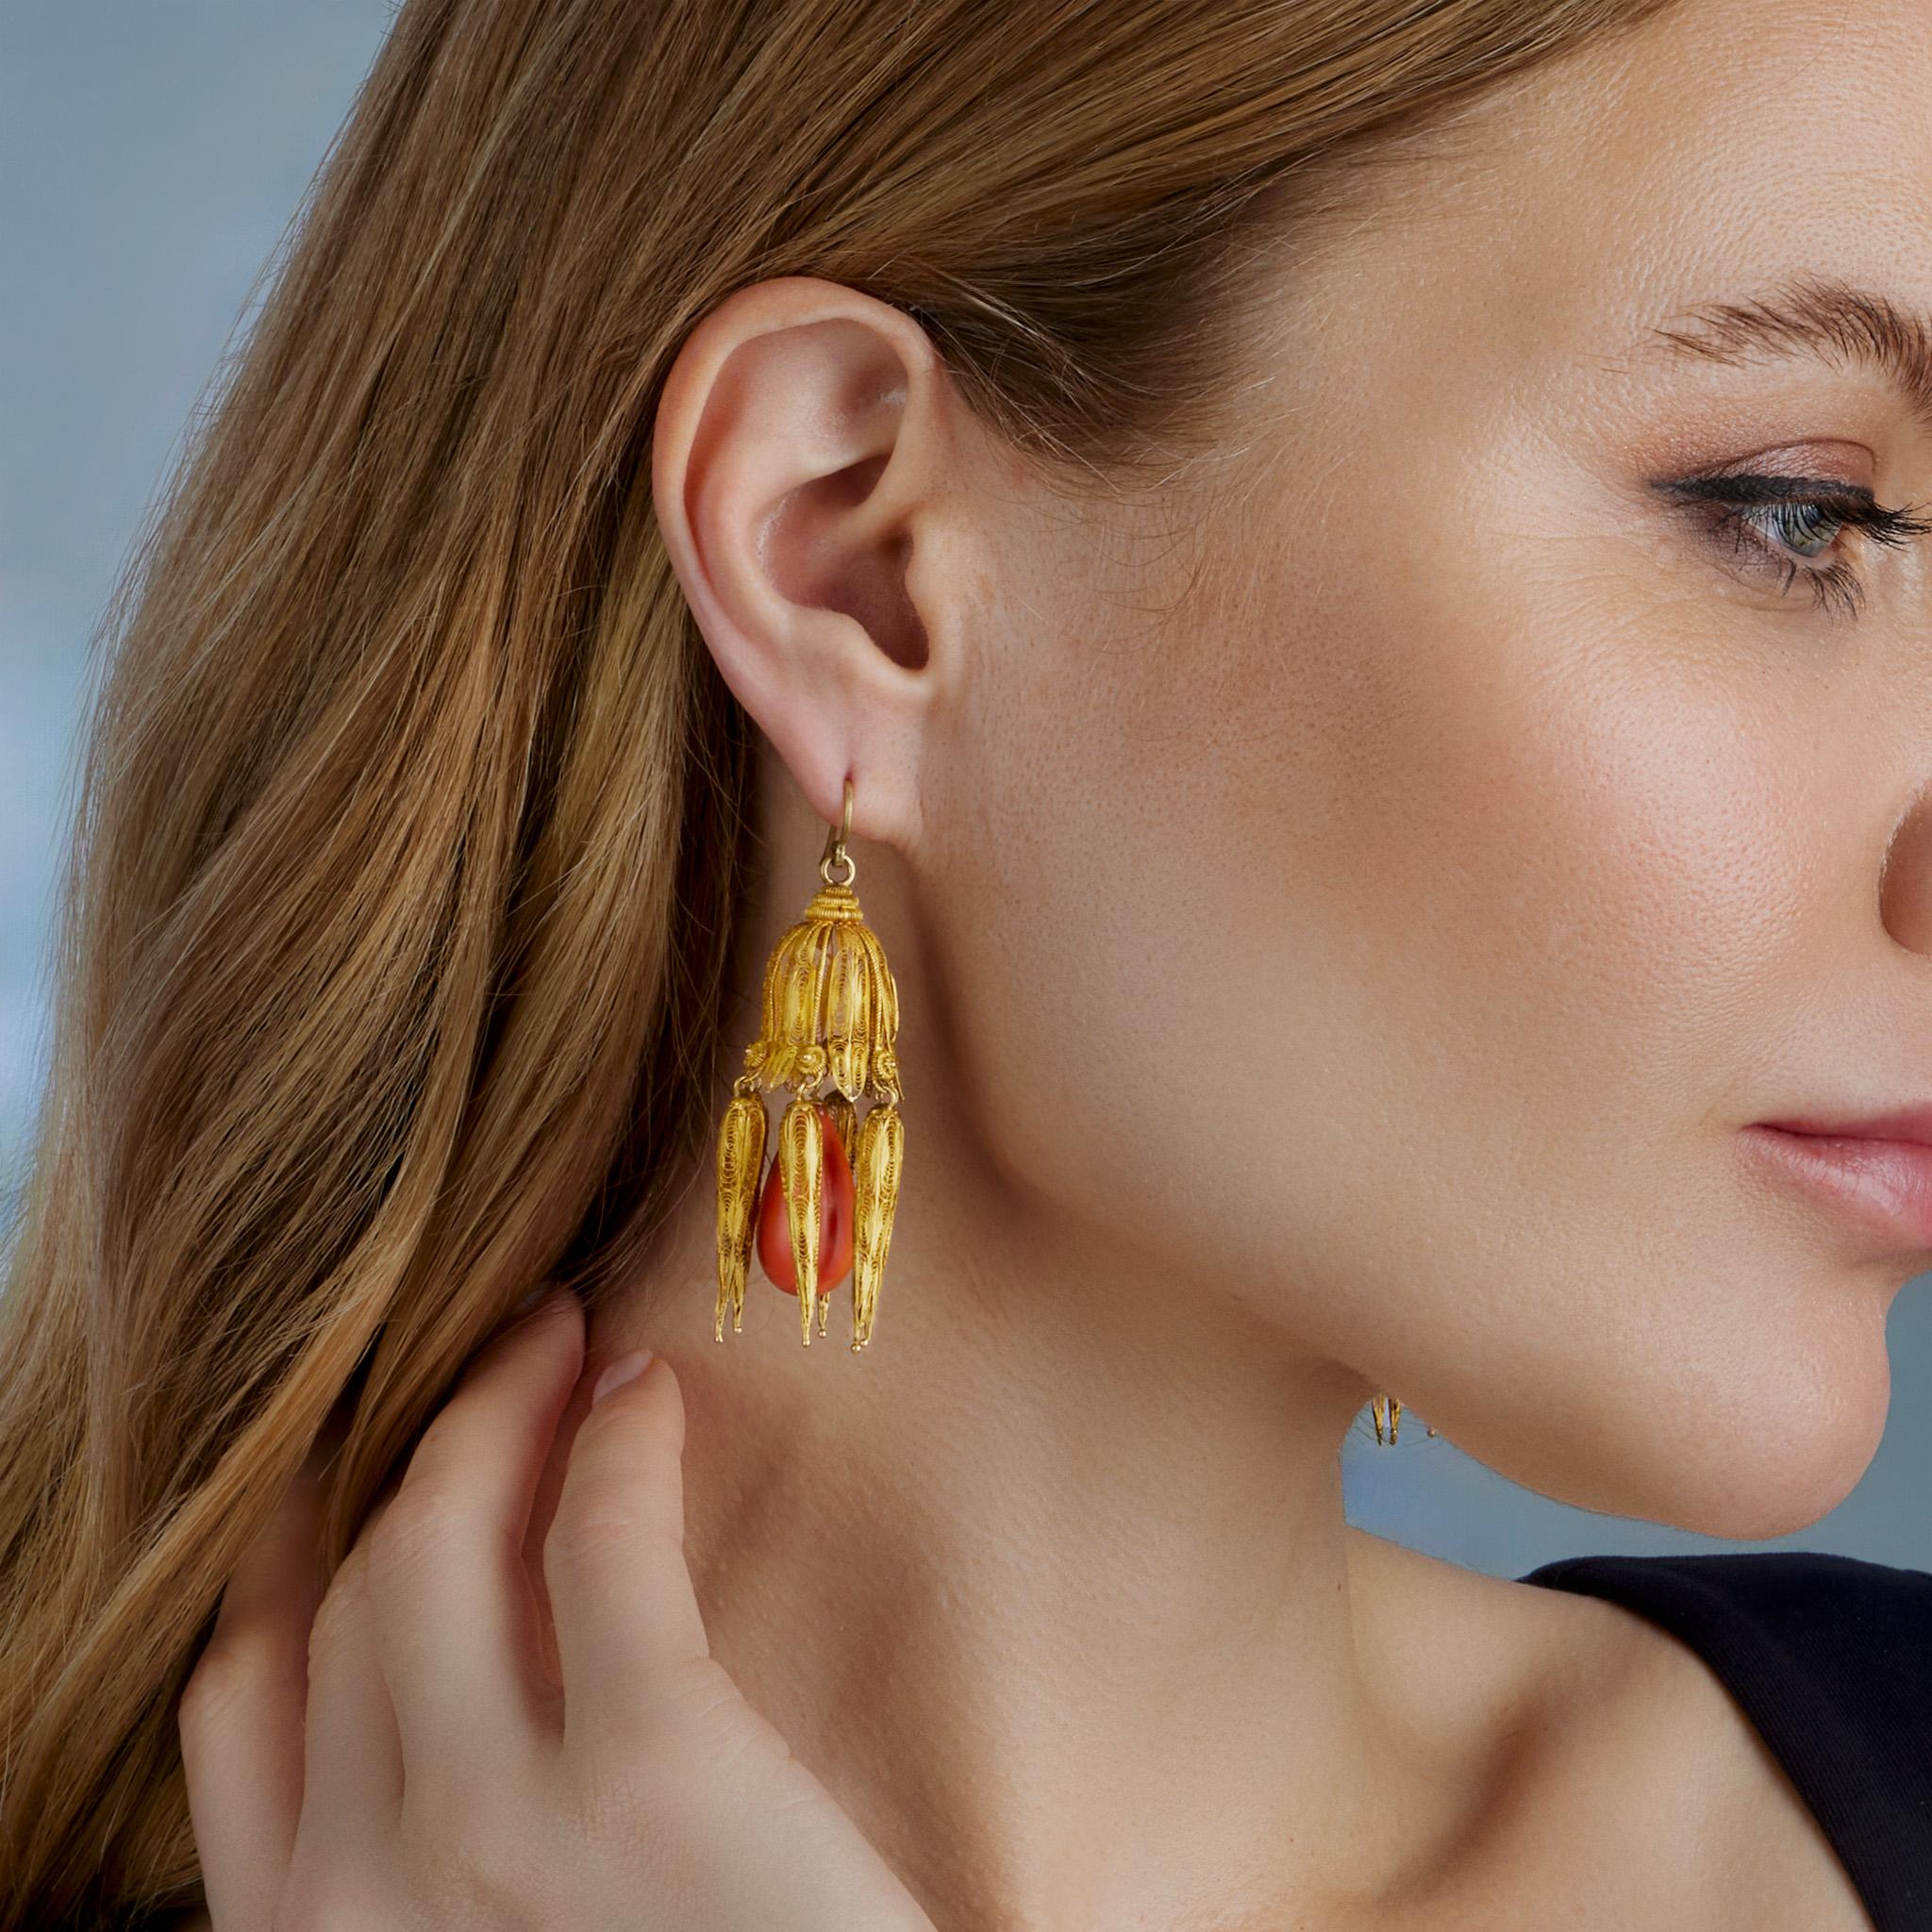 Dating from the early 19th century, these gold cannetille pendant earrings are set with coral. Each pendant earring formed of delicate hand fabricated gold wire is designed as a domed top of pendant leaves, tendrils and tiny rosettes suspending a